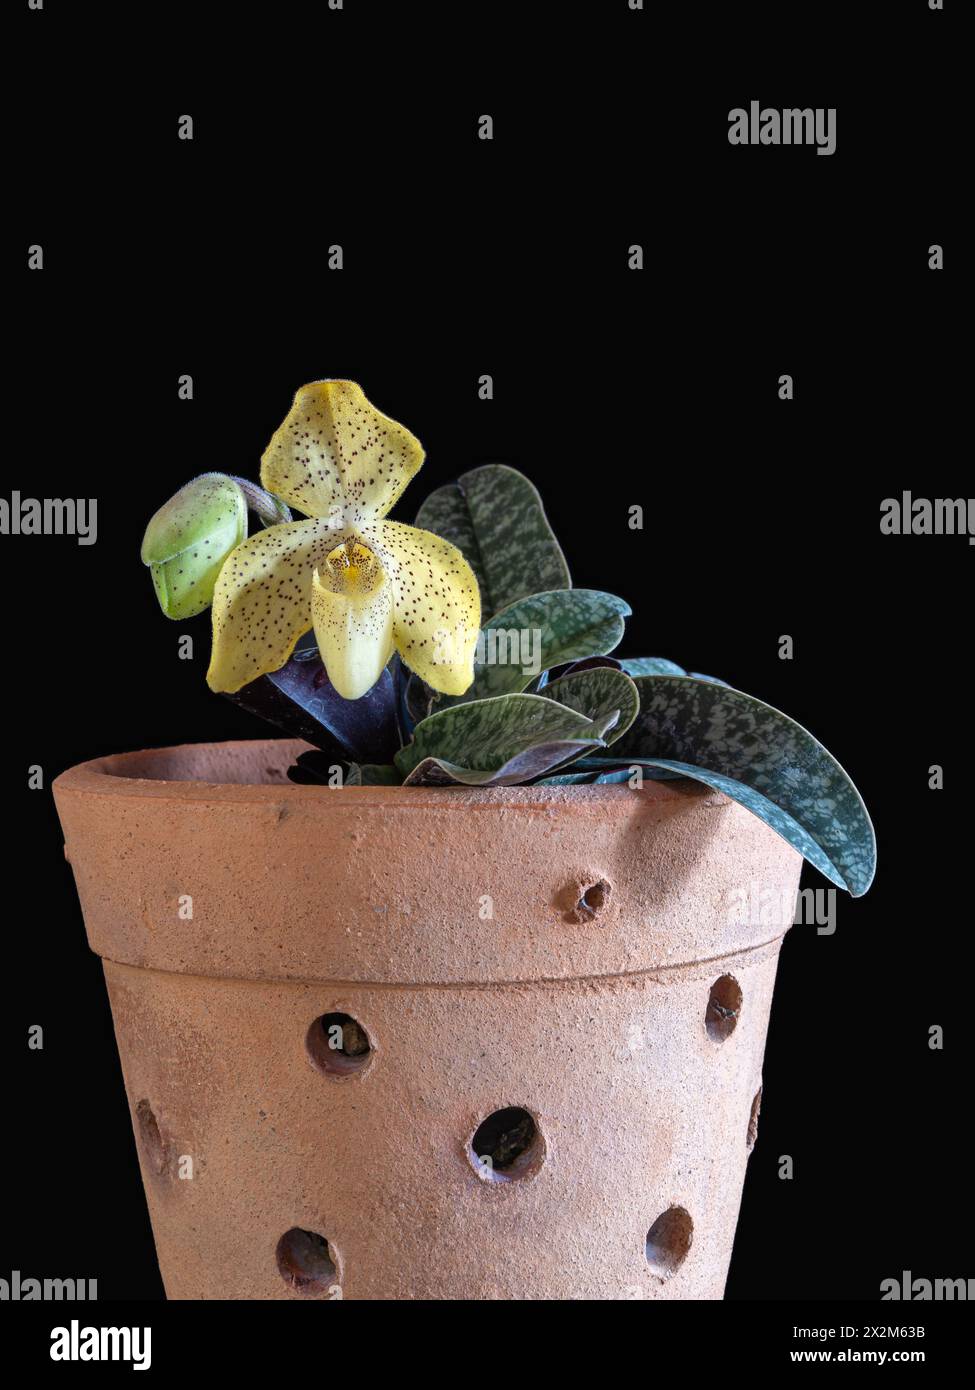 Closeup vertical view of potted lady slipper orchid species paphiopedilum concolor with speckled yellow flower and bud isolated on black background Stock Photo